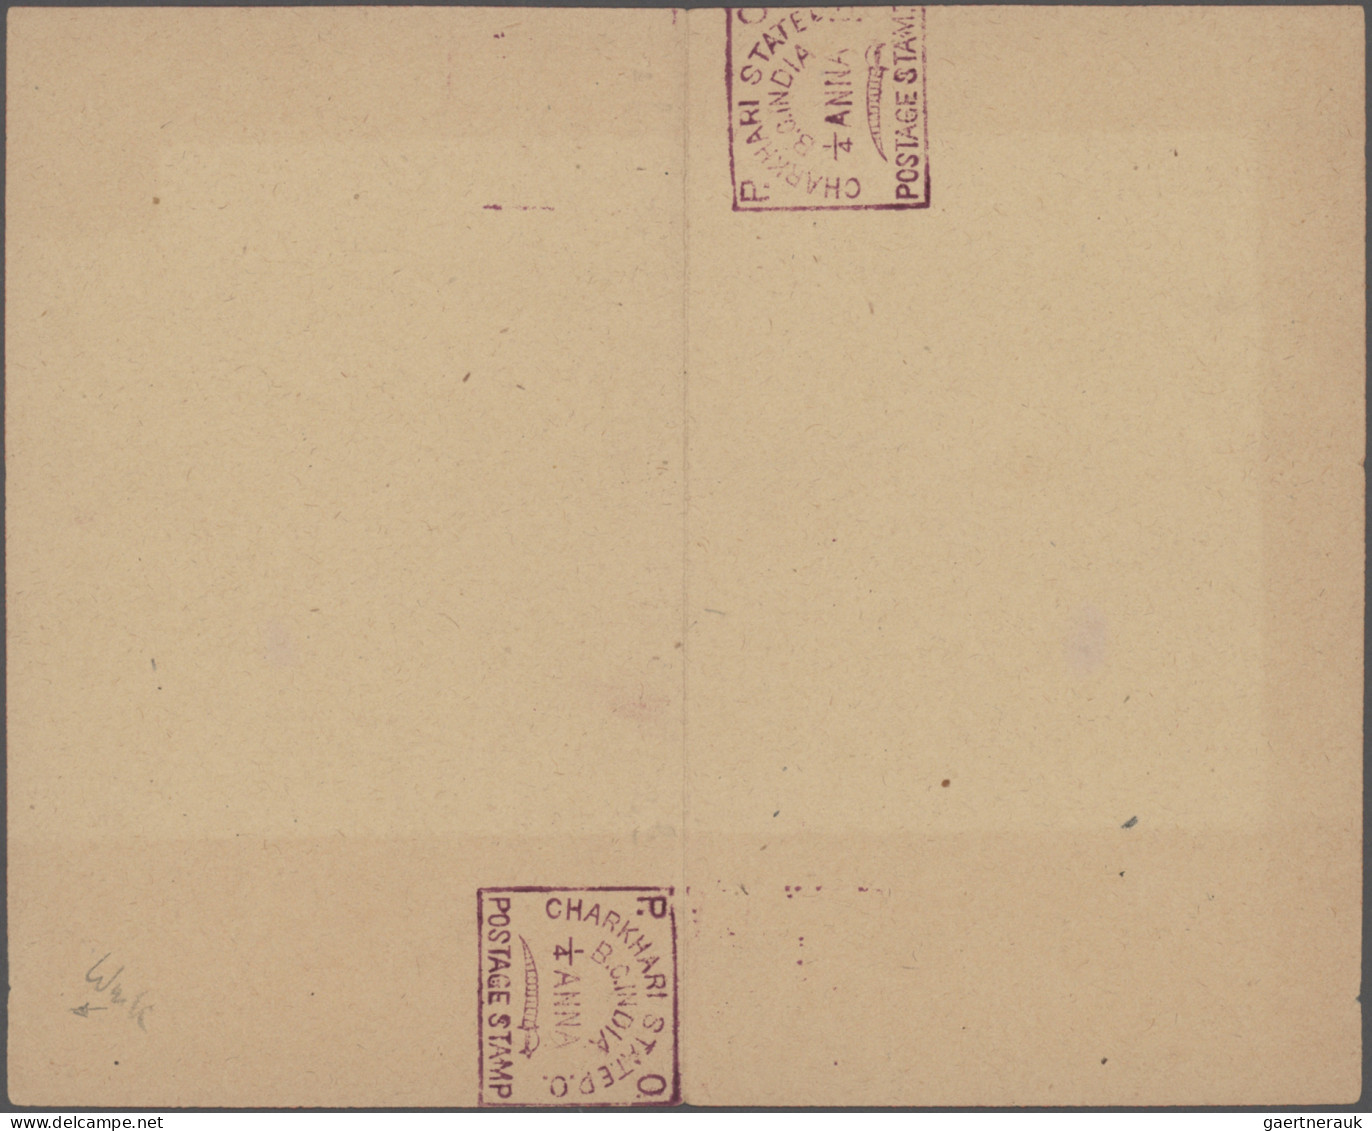 India - Feudal States: 1877/1950 "Postal Stationery of the Feudatory States": Sp